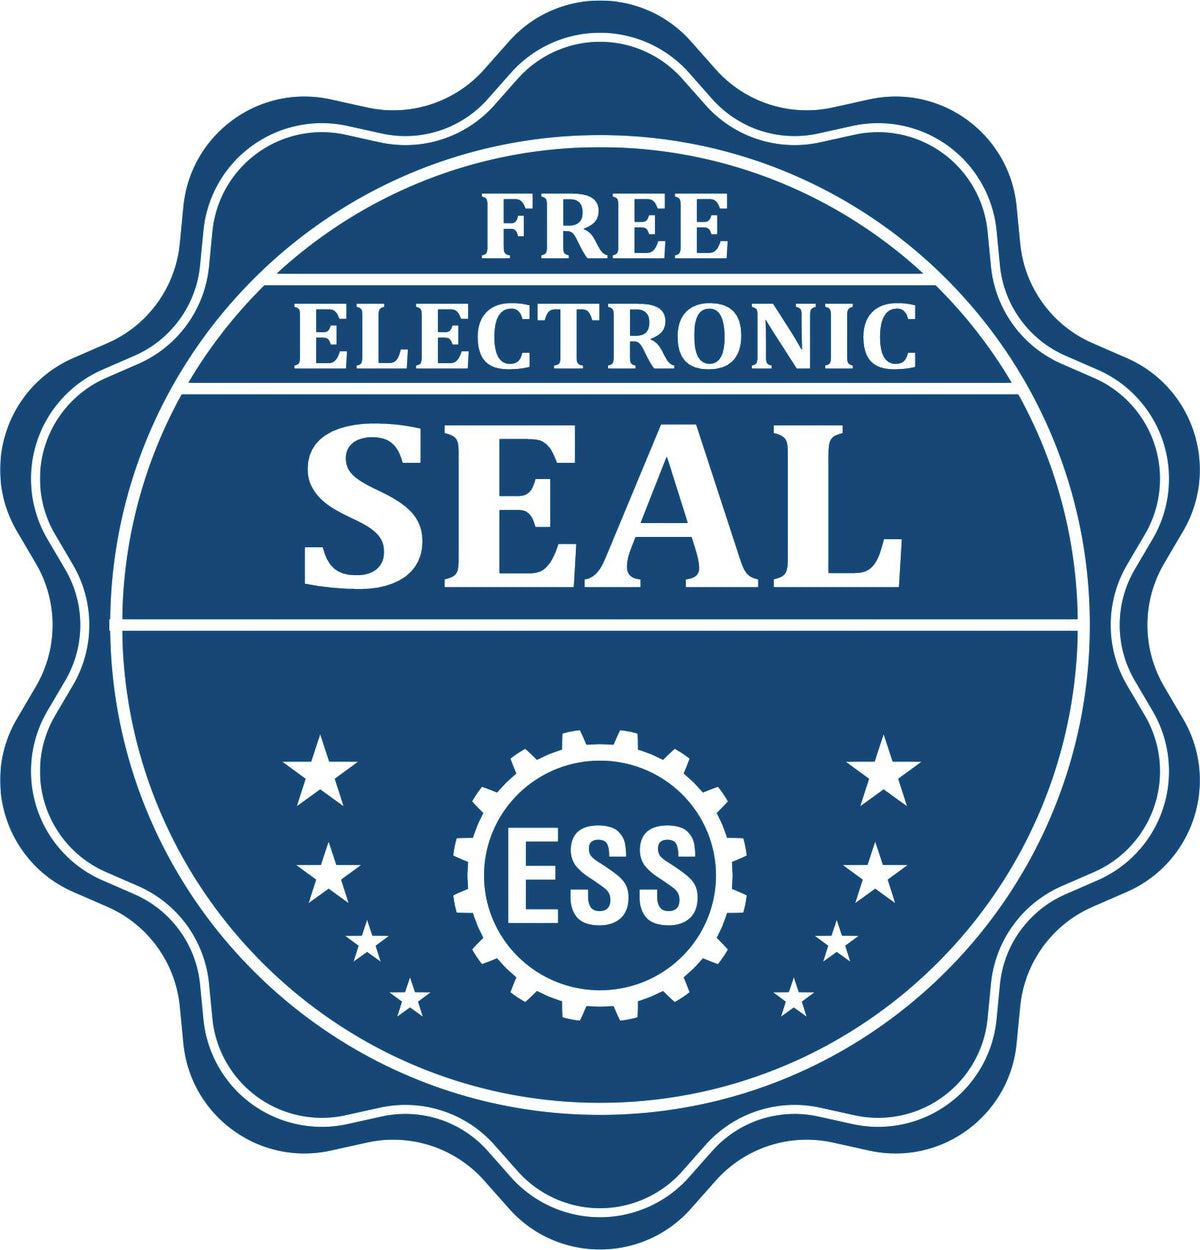 A badge showing a free electronic seal for the Long Reach Louisiana Land Surveyor Seal with stars and the ESS gear on the emblem.